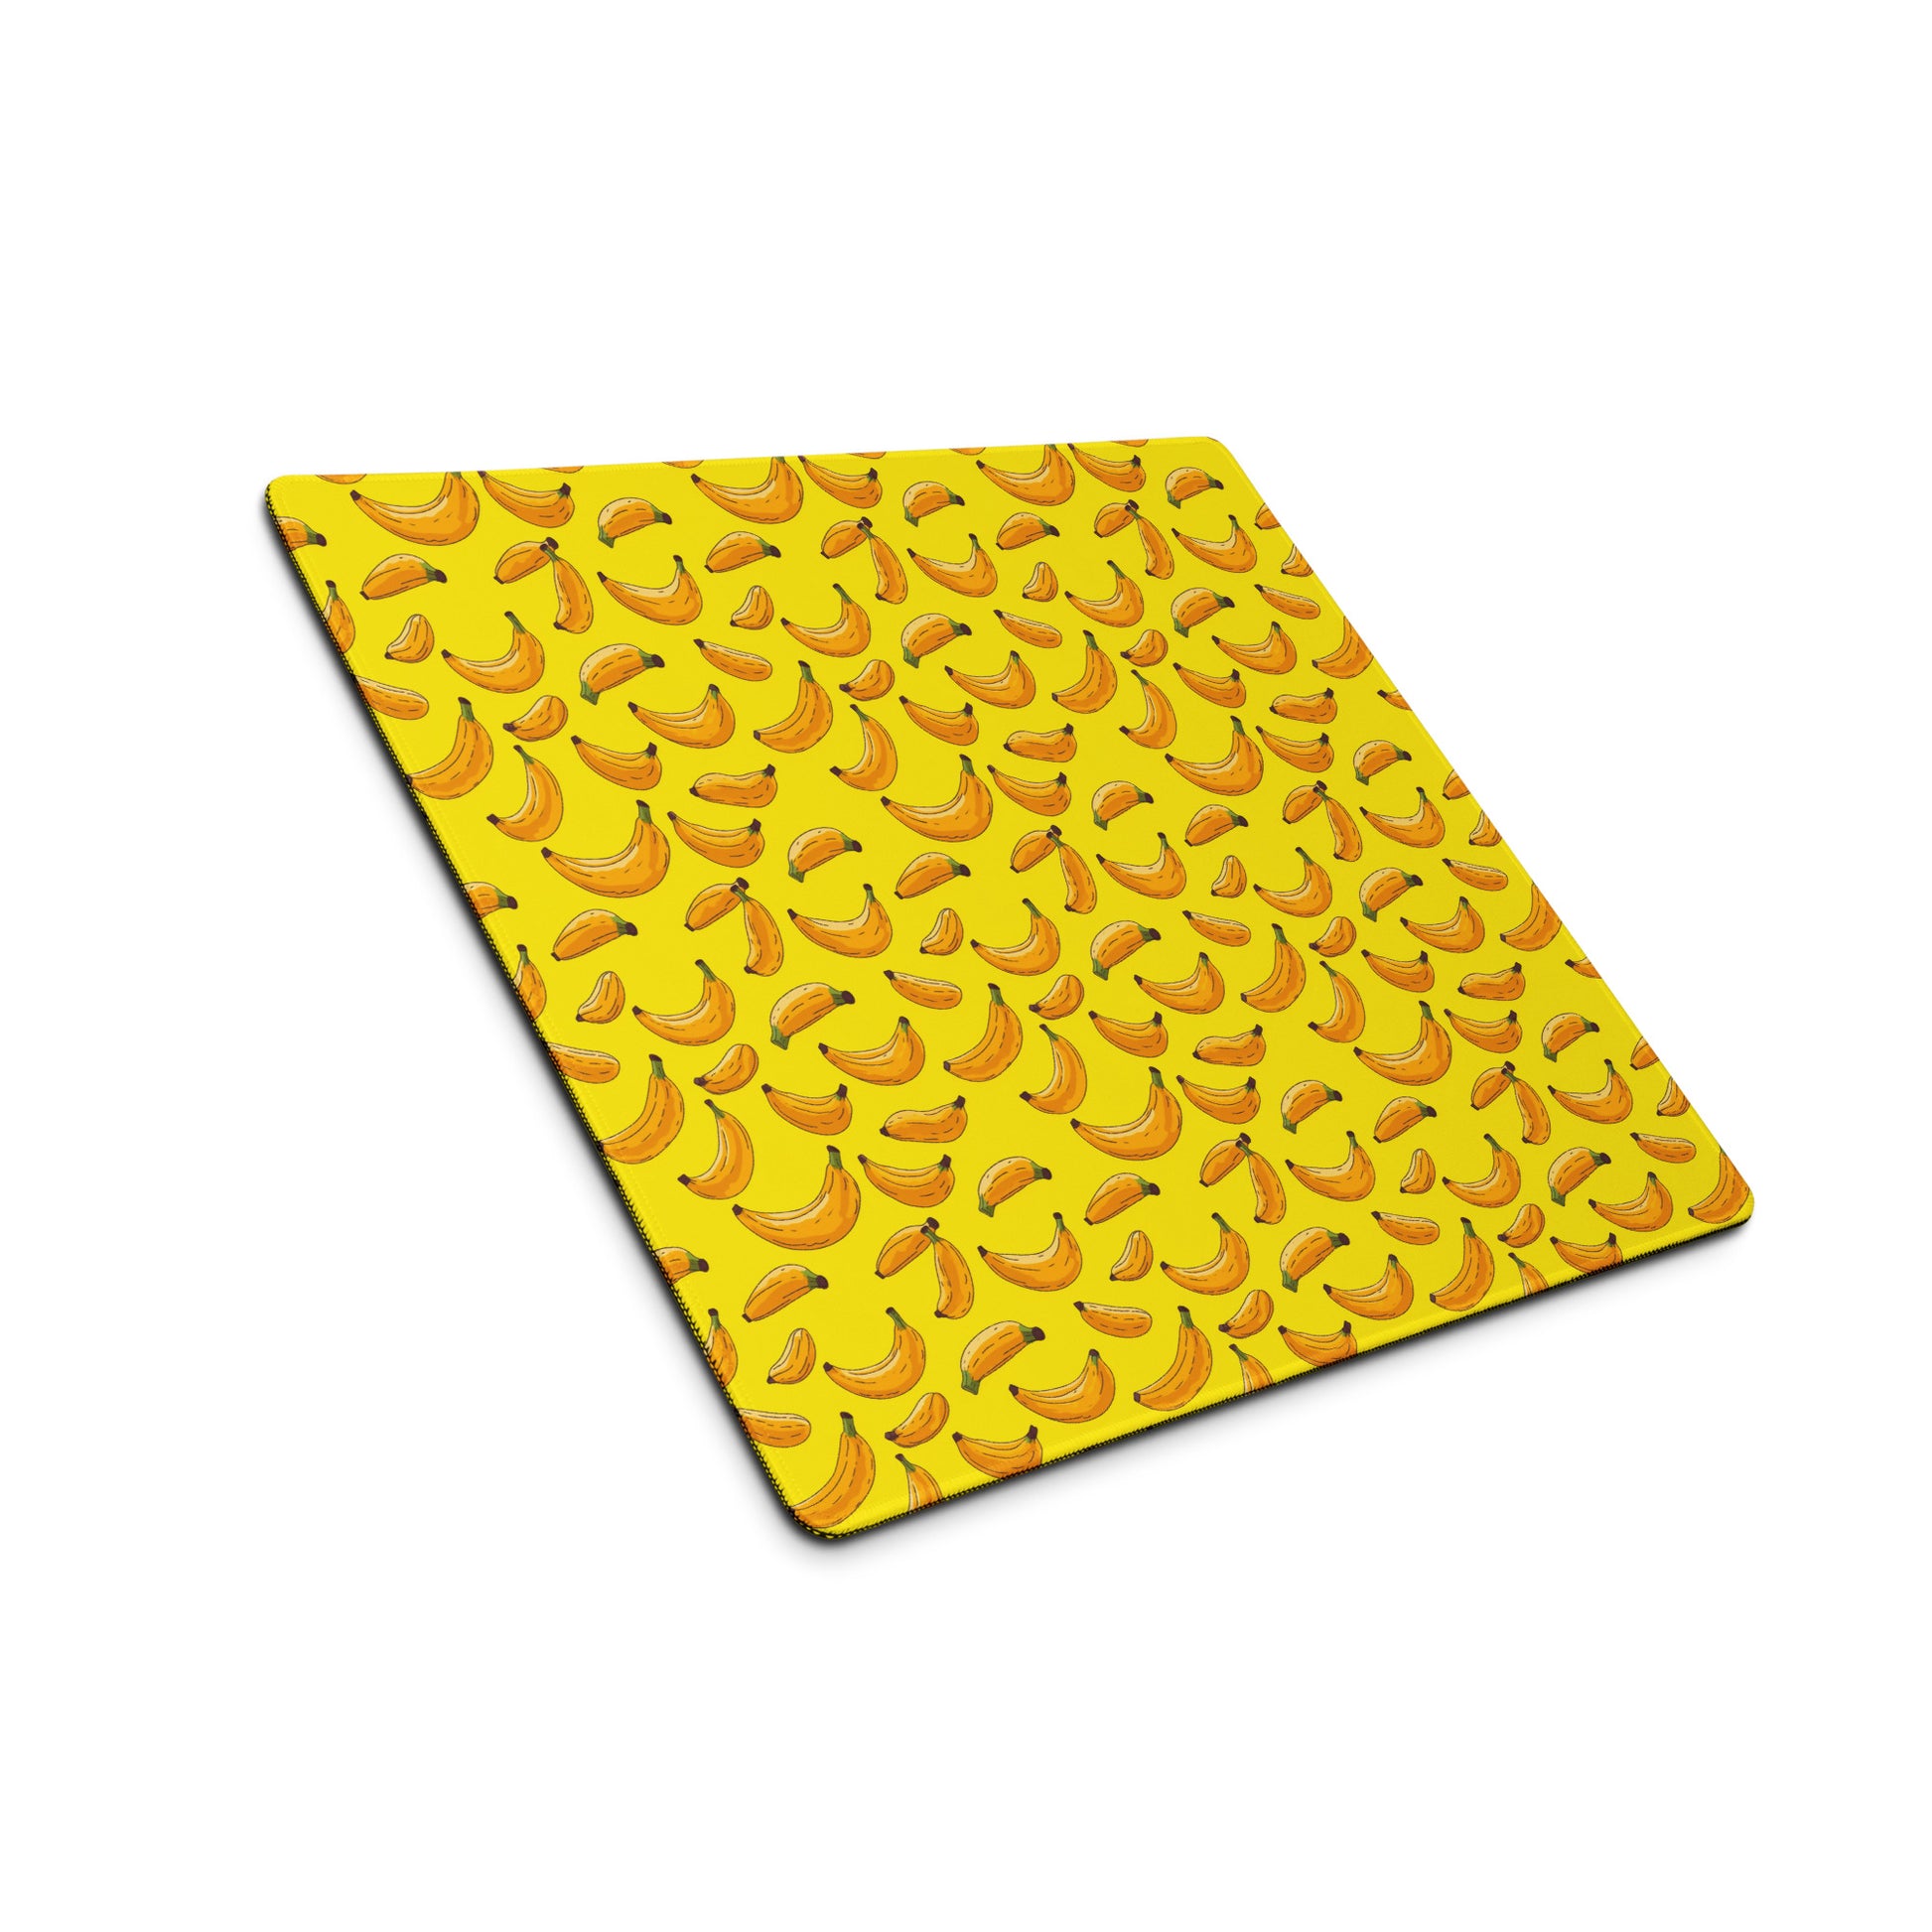 A 18" x 16" desk pad with bananas all over it shown at an angle. Yellow in color.